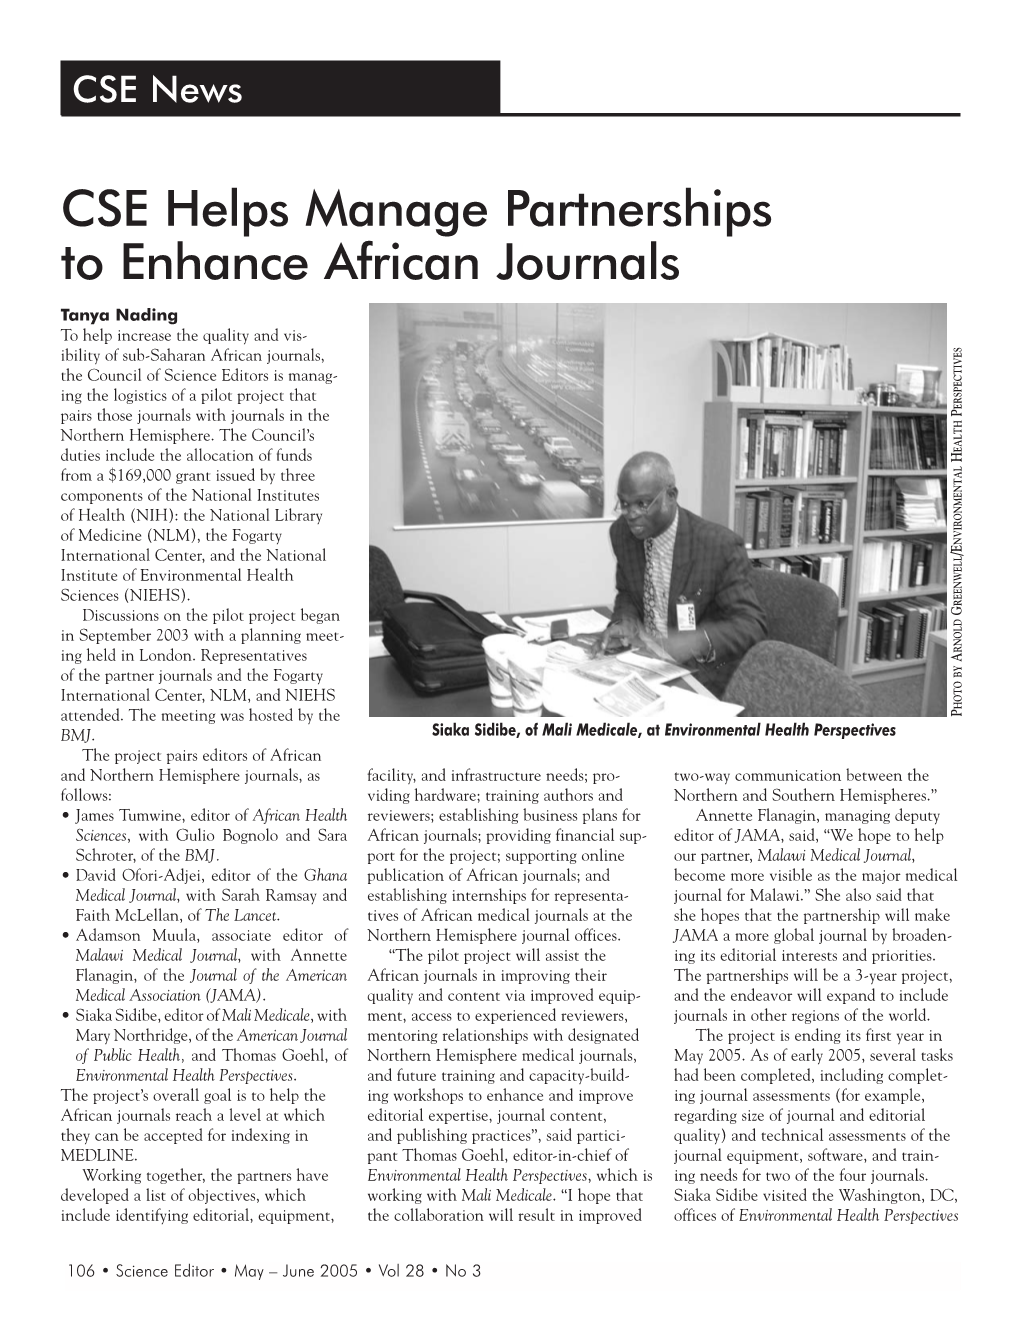 CSE Helps Manage Partnerships to Enhance African Journals